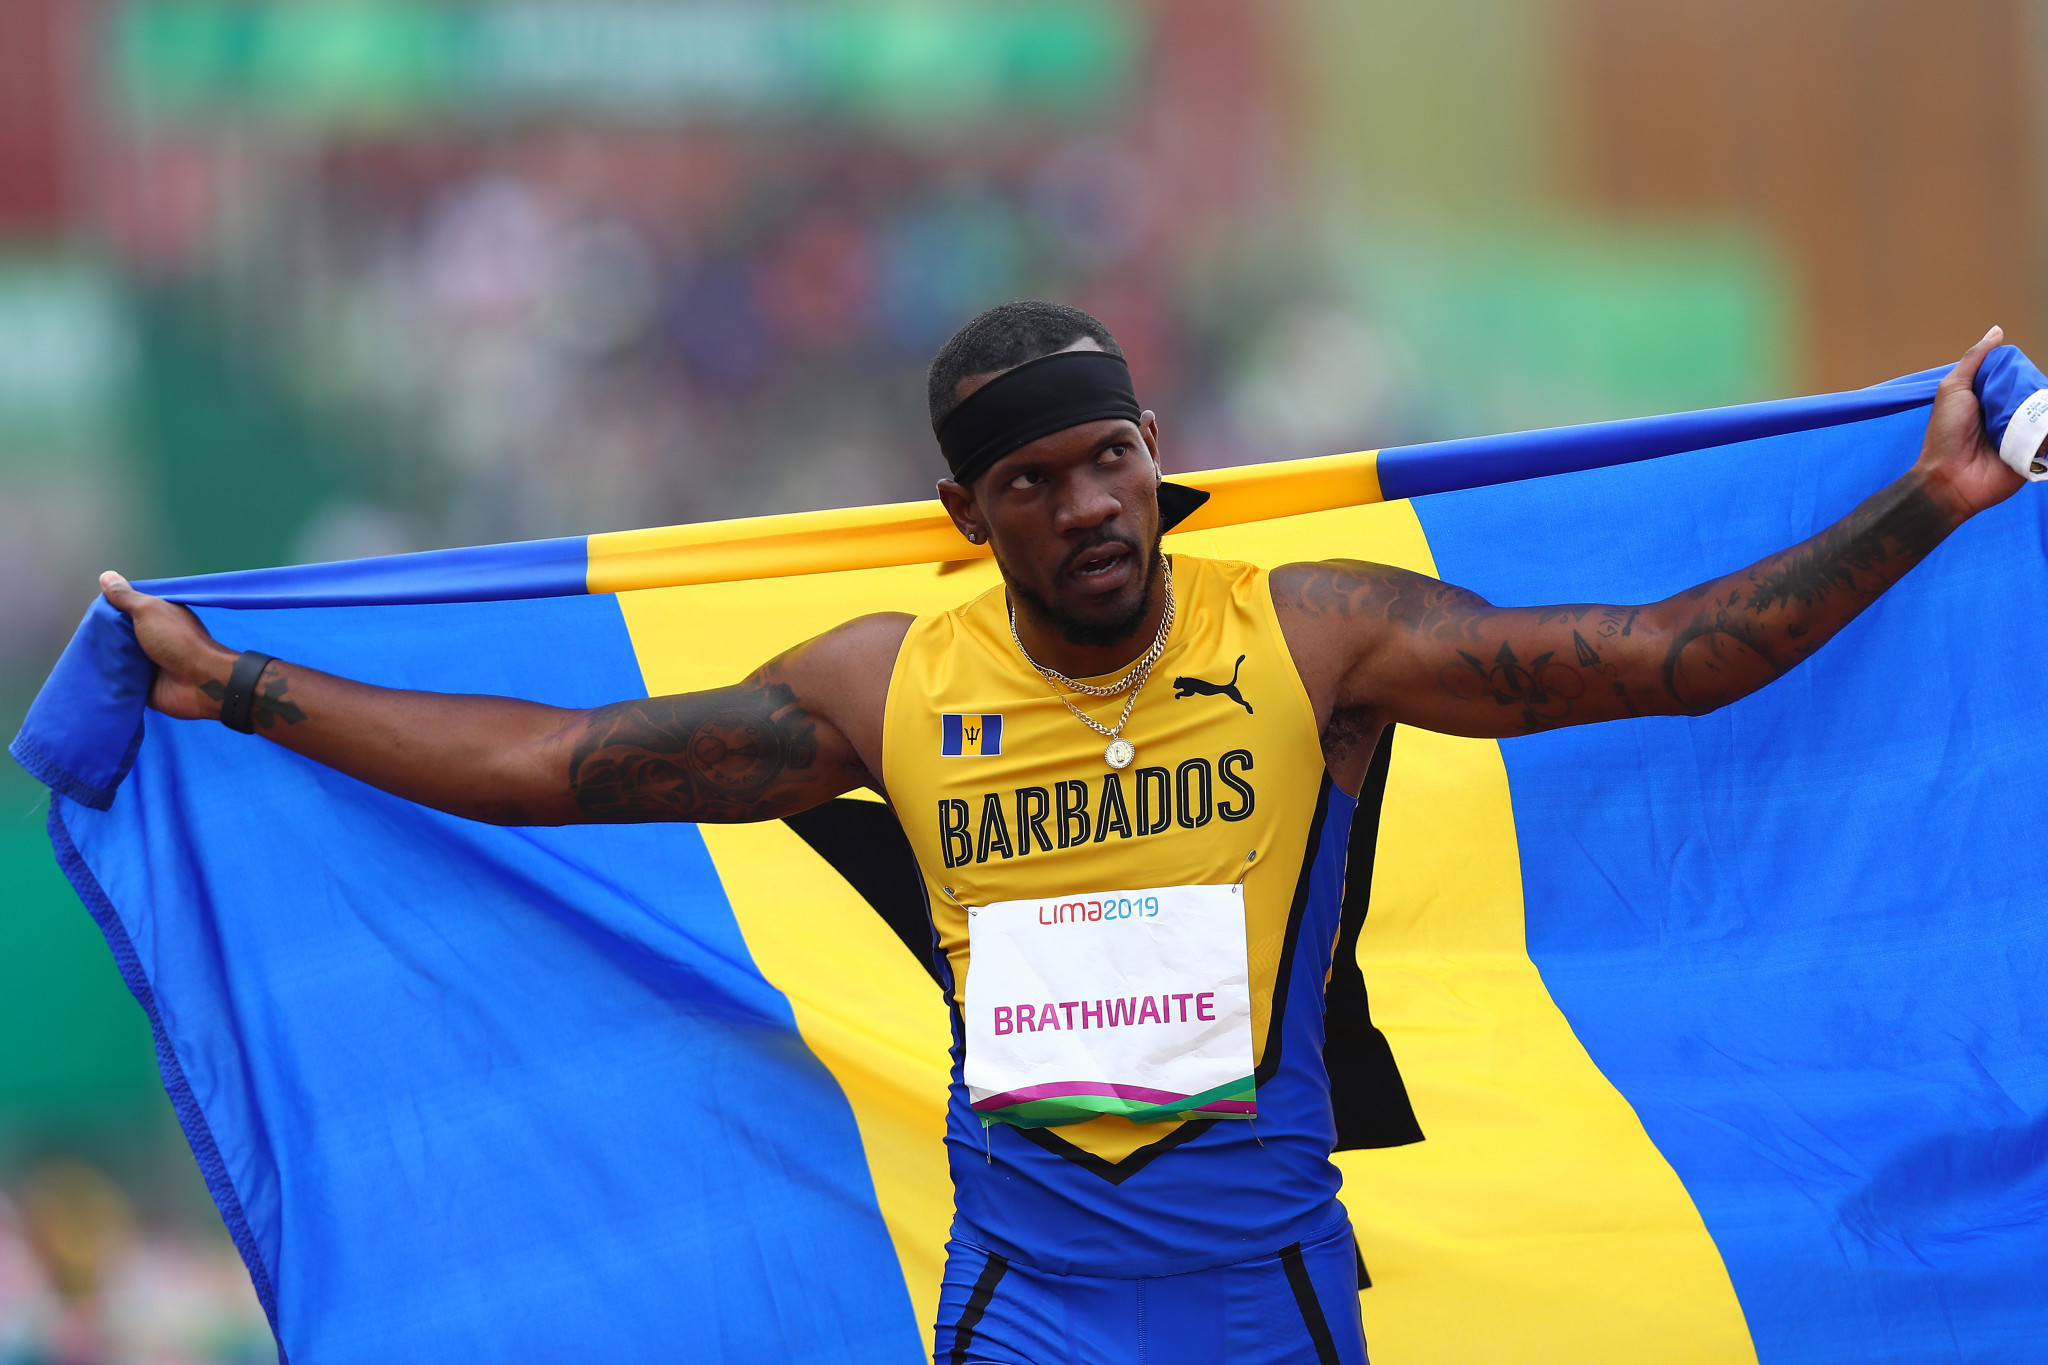 Shane Brathwaite won Barbados' first gold medal of the Games ©Getty Images